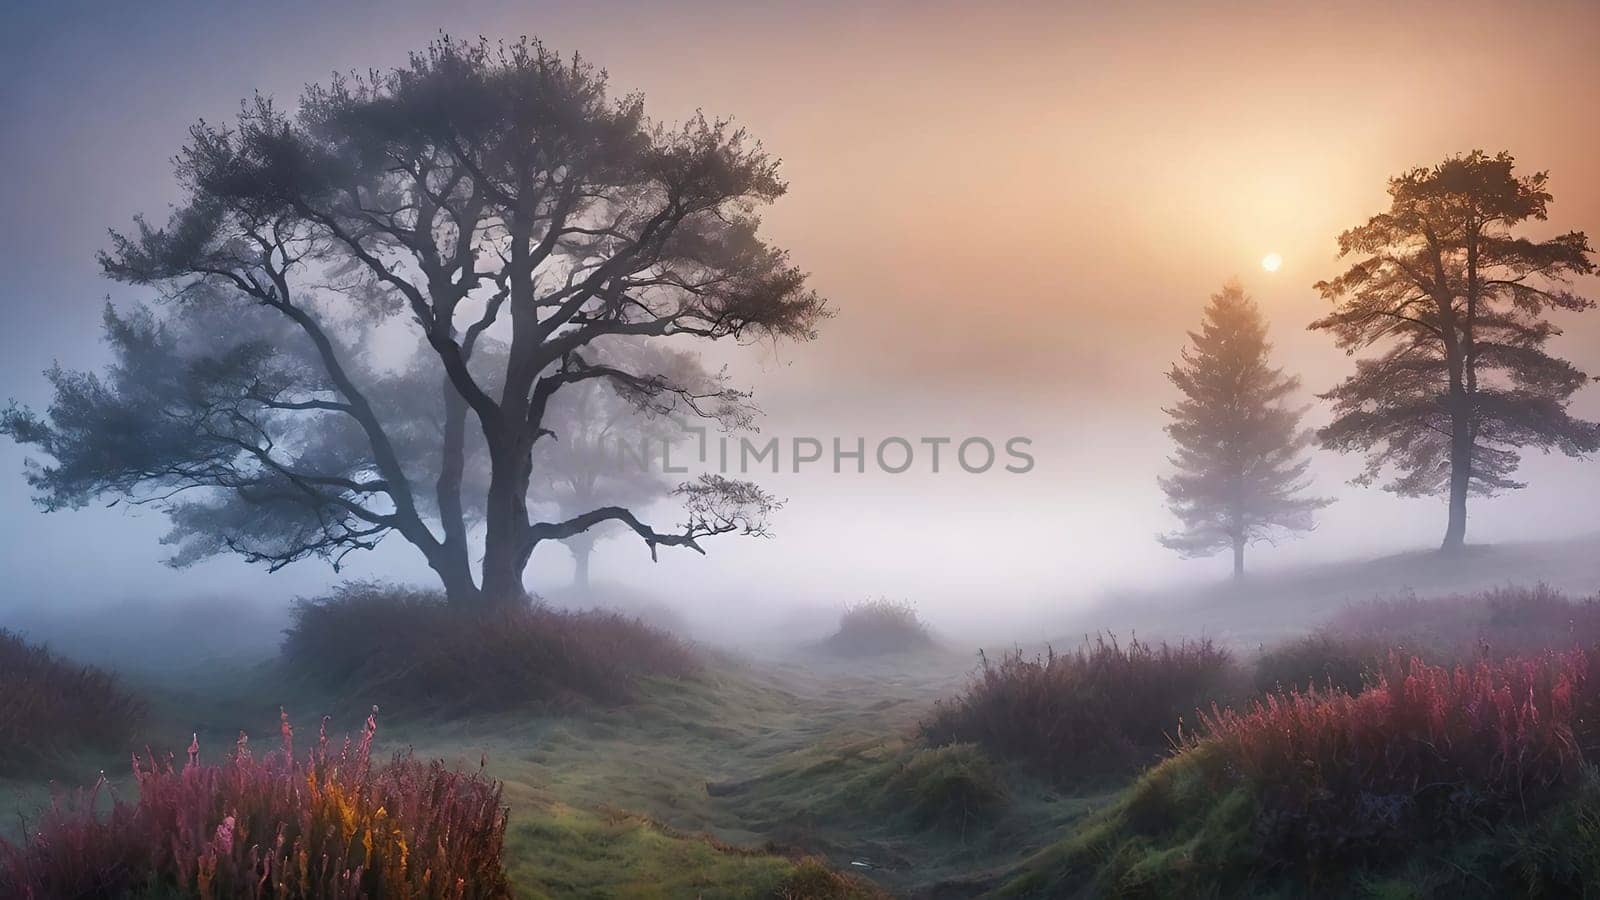 Beautiful landscape image of a misty sunrise over a tree in the countryside. by yilmazsavaskandag